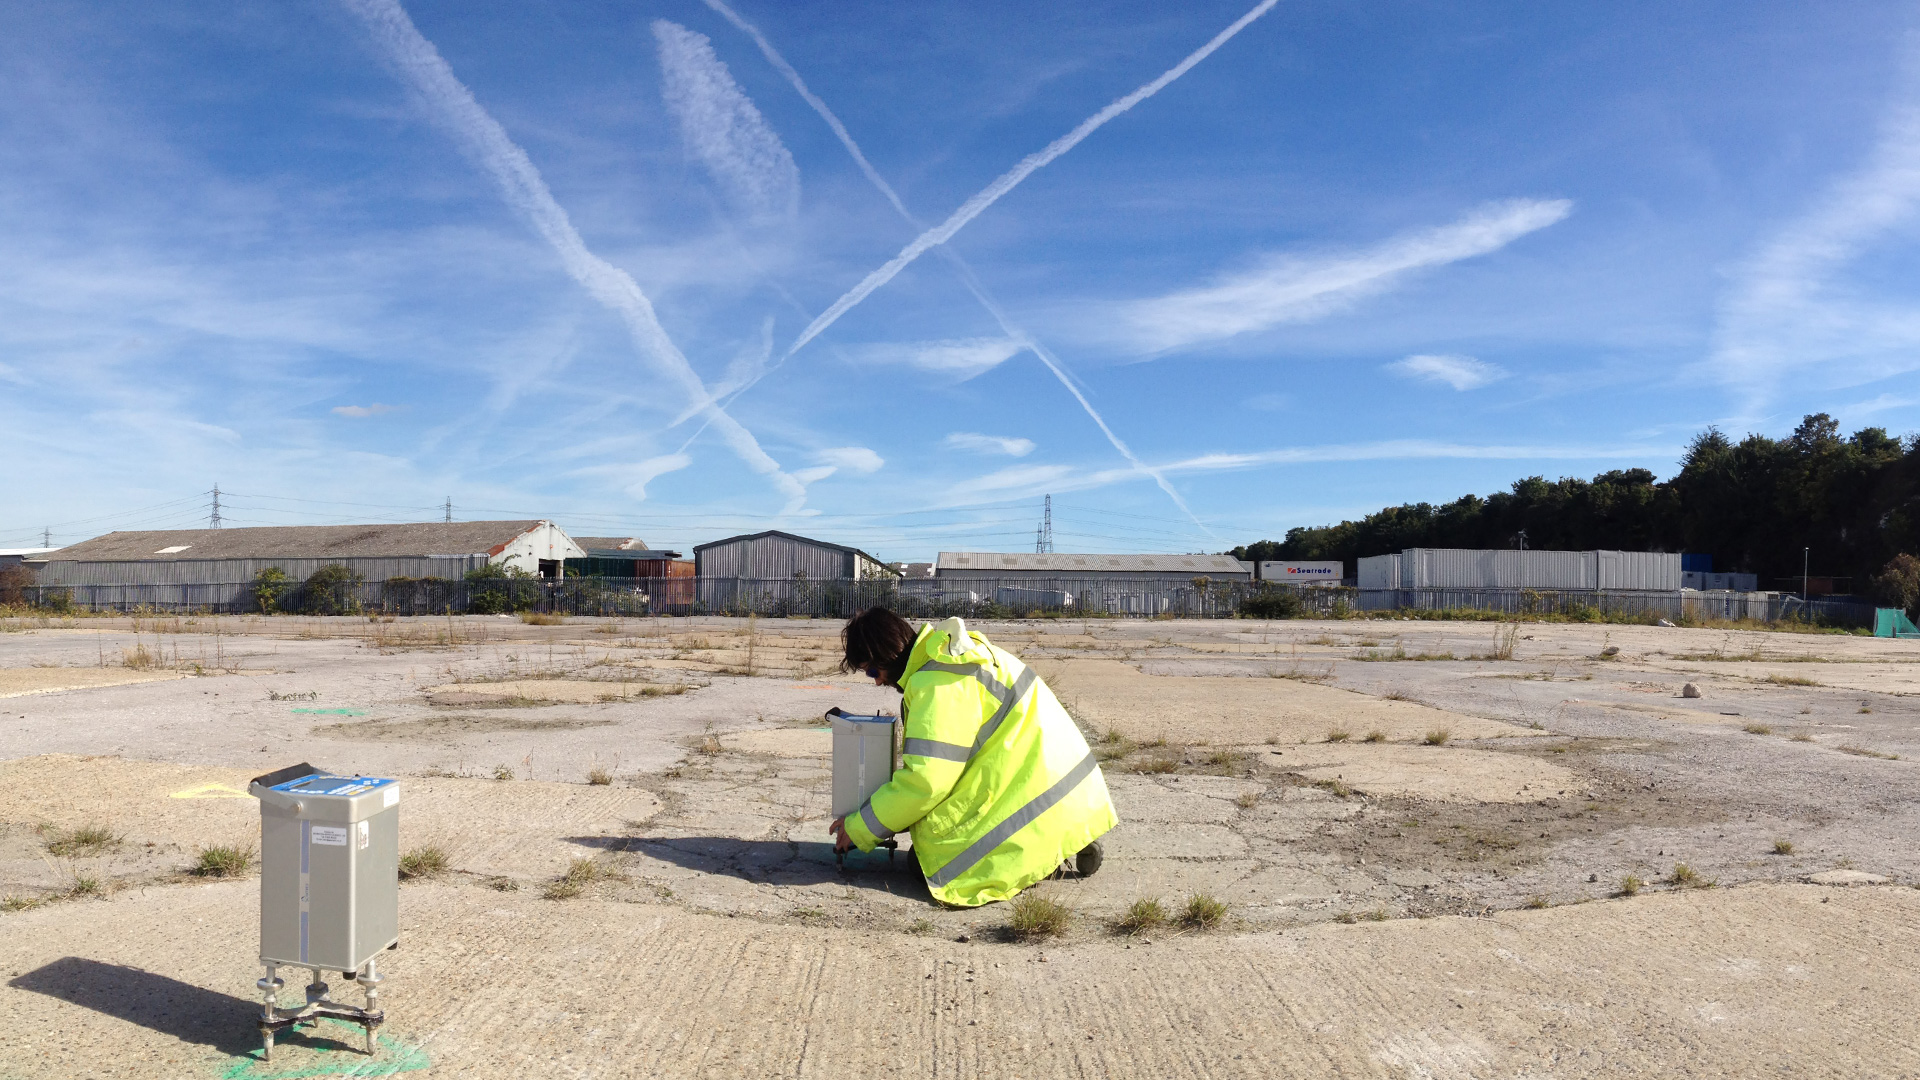 Quantum mapper in use on a brownfield site